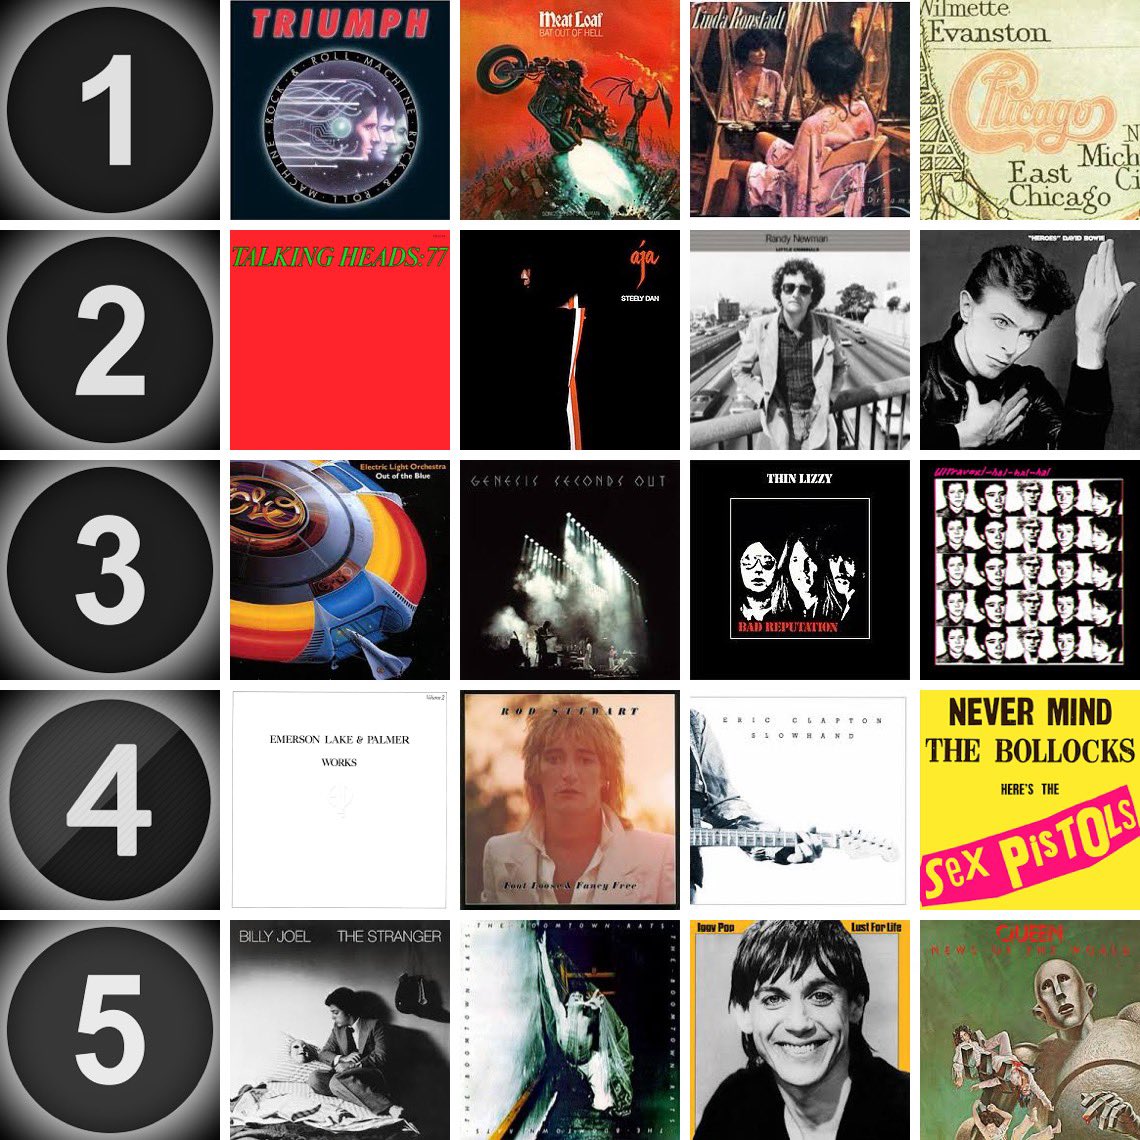 Sept-Dec 1977 Album Releases 
Pick ONE from EACH ROW